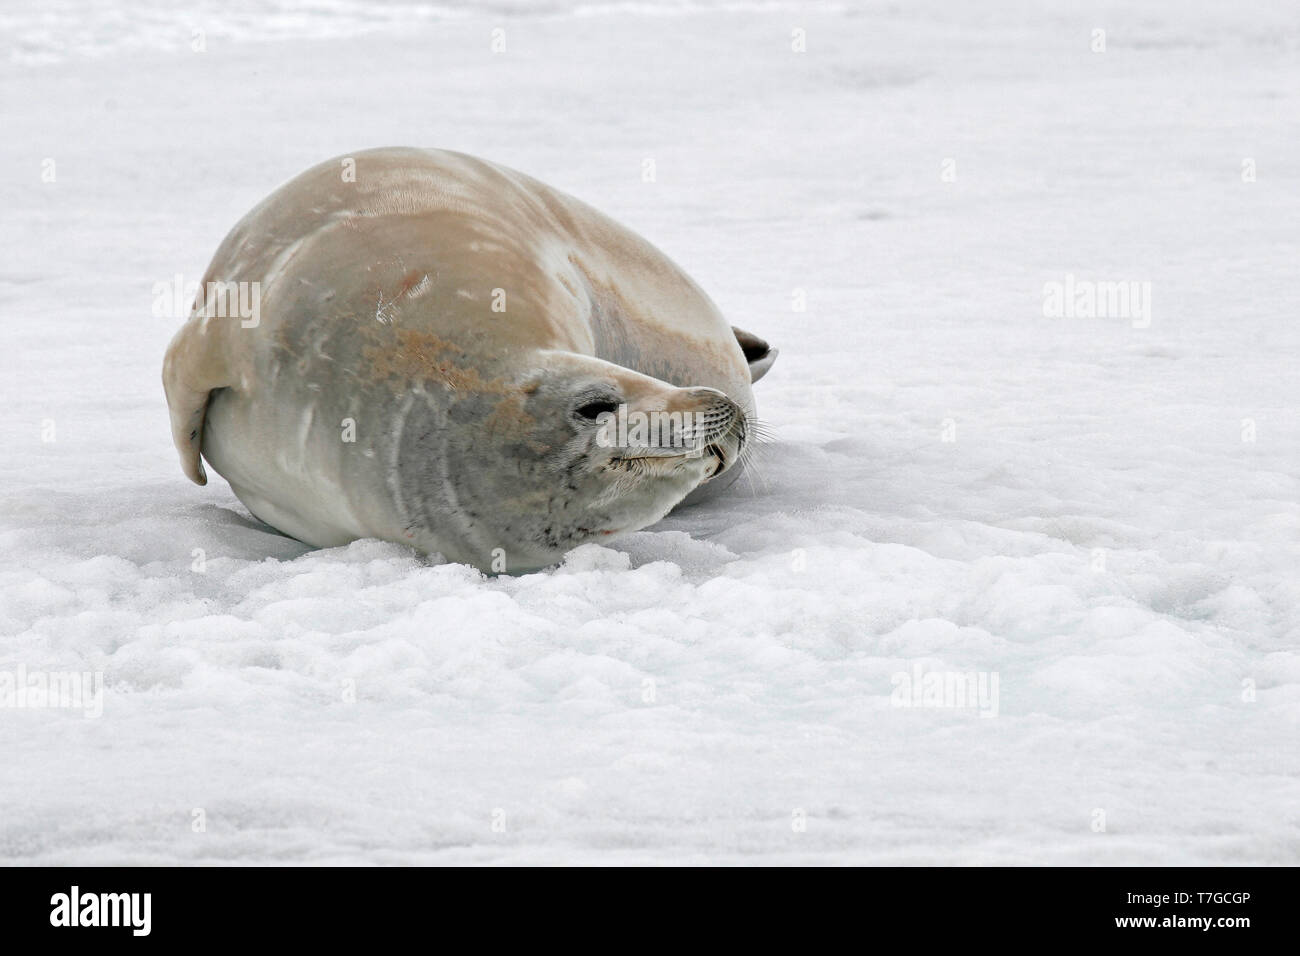 Crabeater seal perched on ice Stock Photo